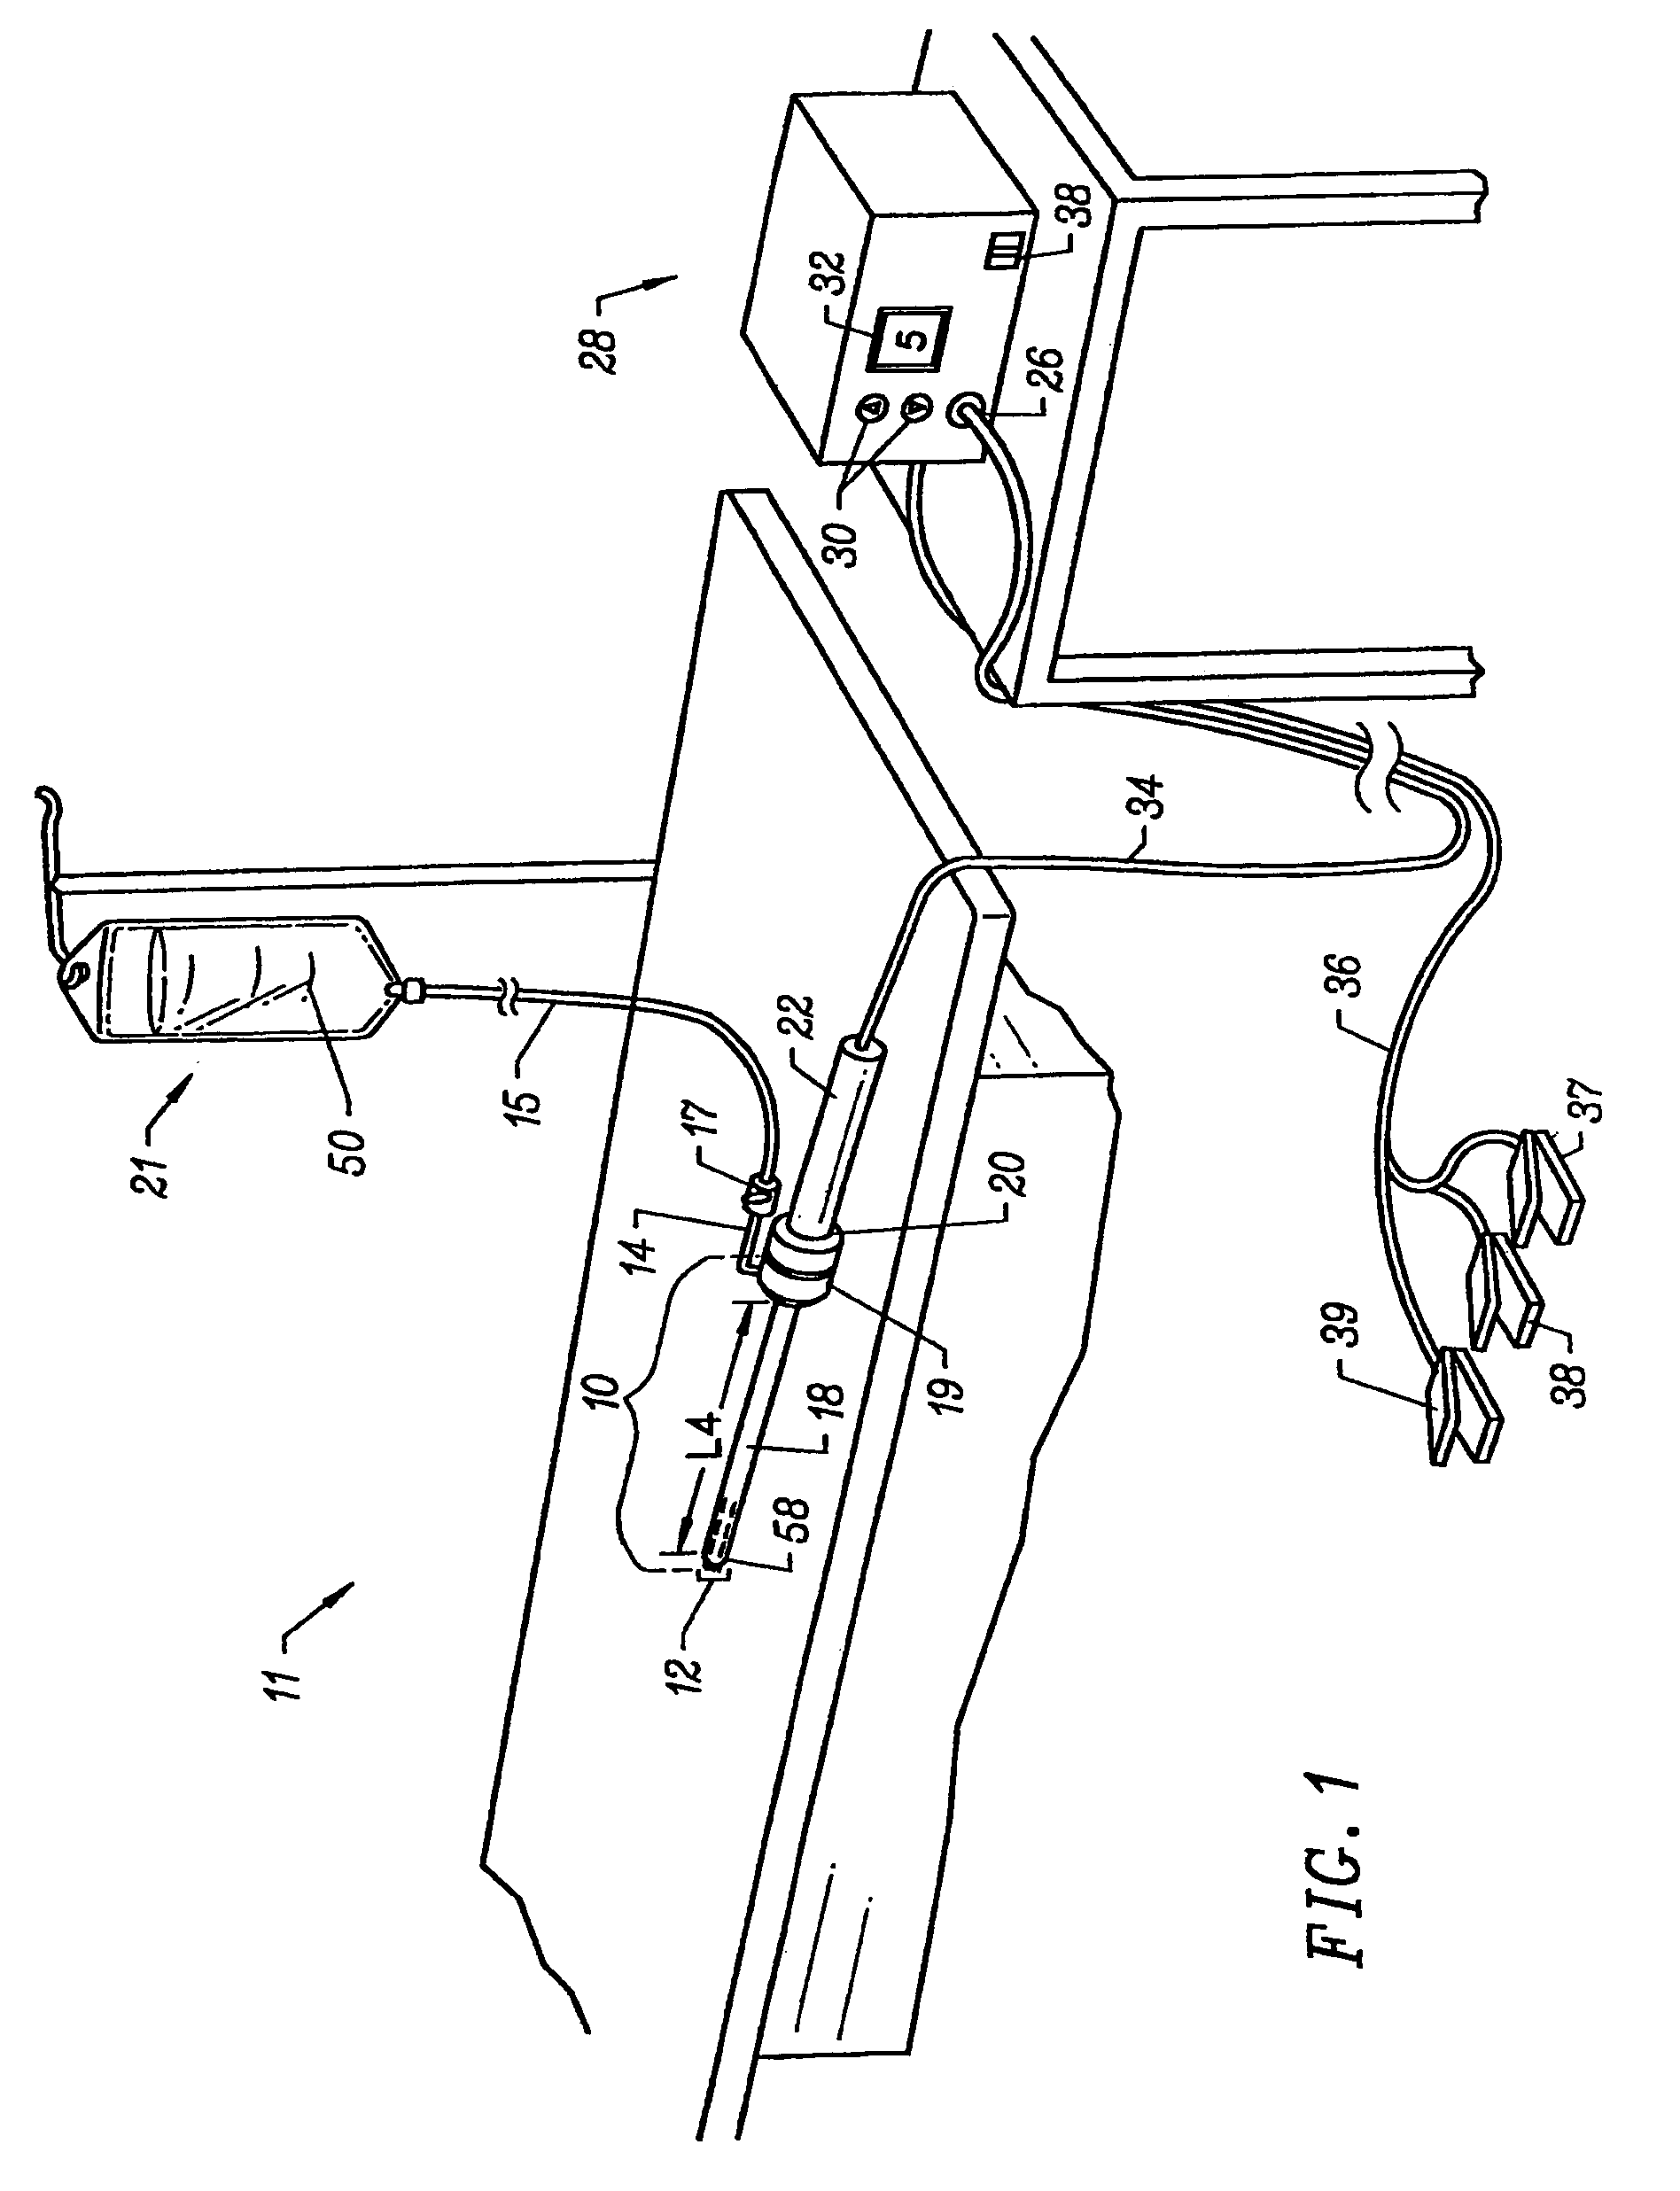 Electrosurgical probe with movable return electrode and methods related thereto